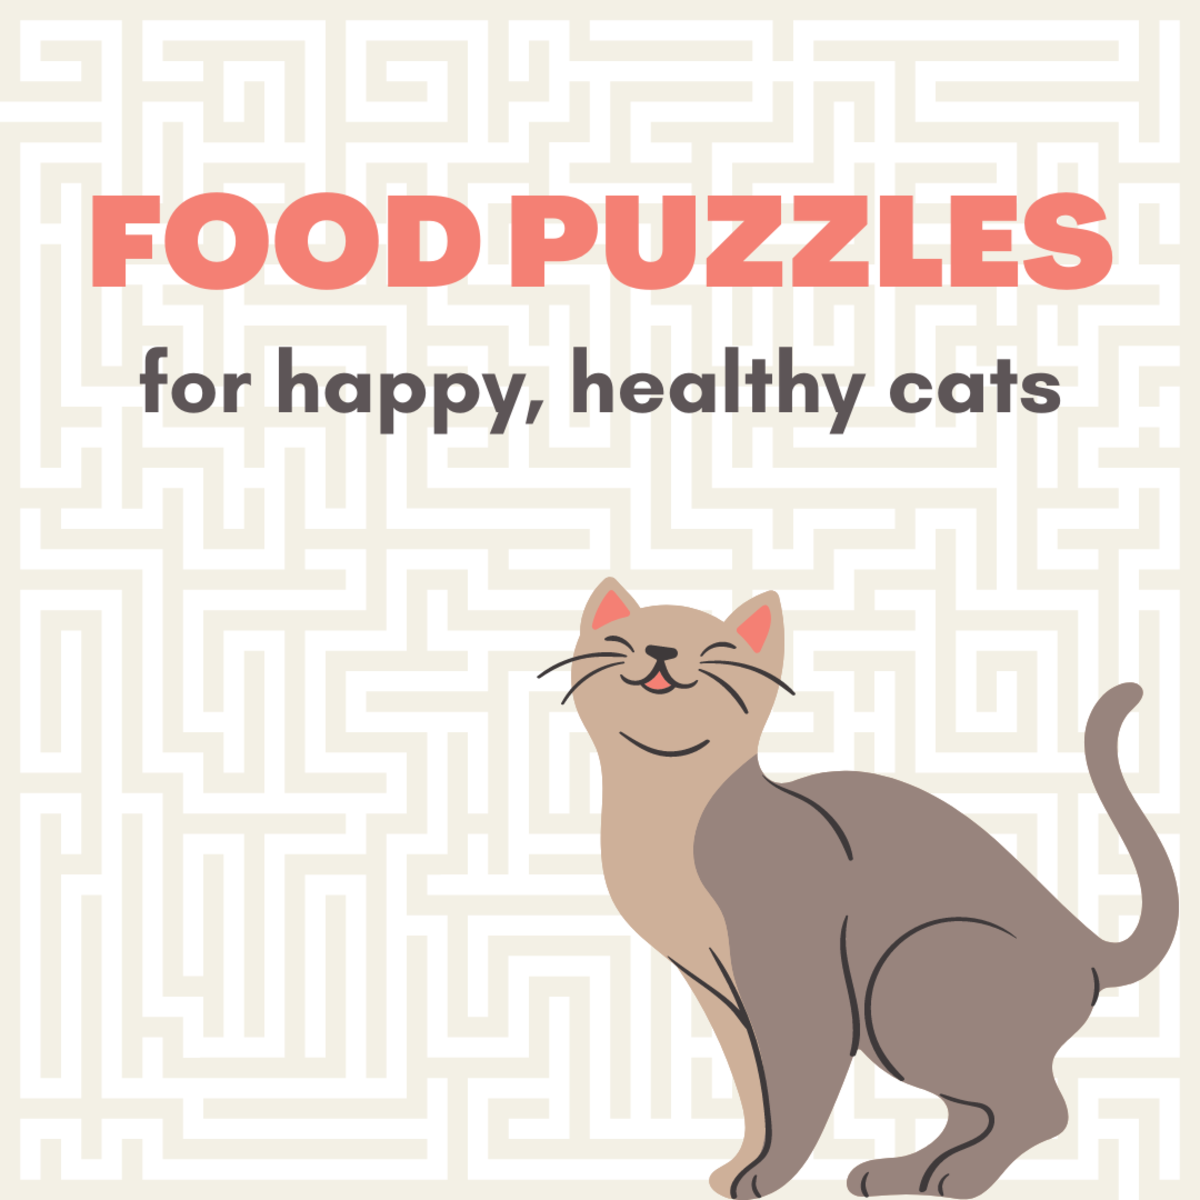 https://images.saymedia-content.com/.image/t_share/MTg1NjM5MjI1NTYyMTEzNDI4/the-best-food-puzzles-for-cats-and-why-theyre-important.png